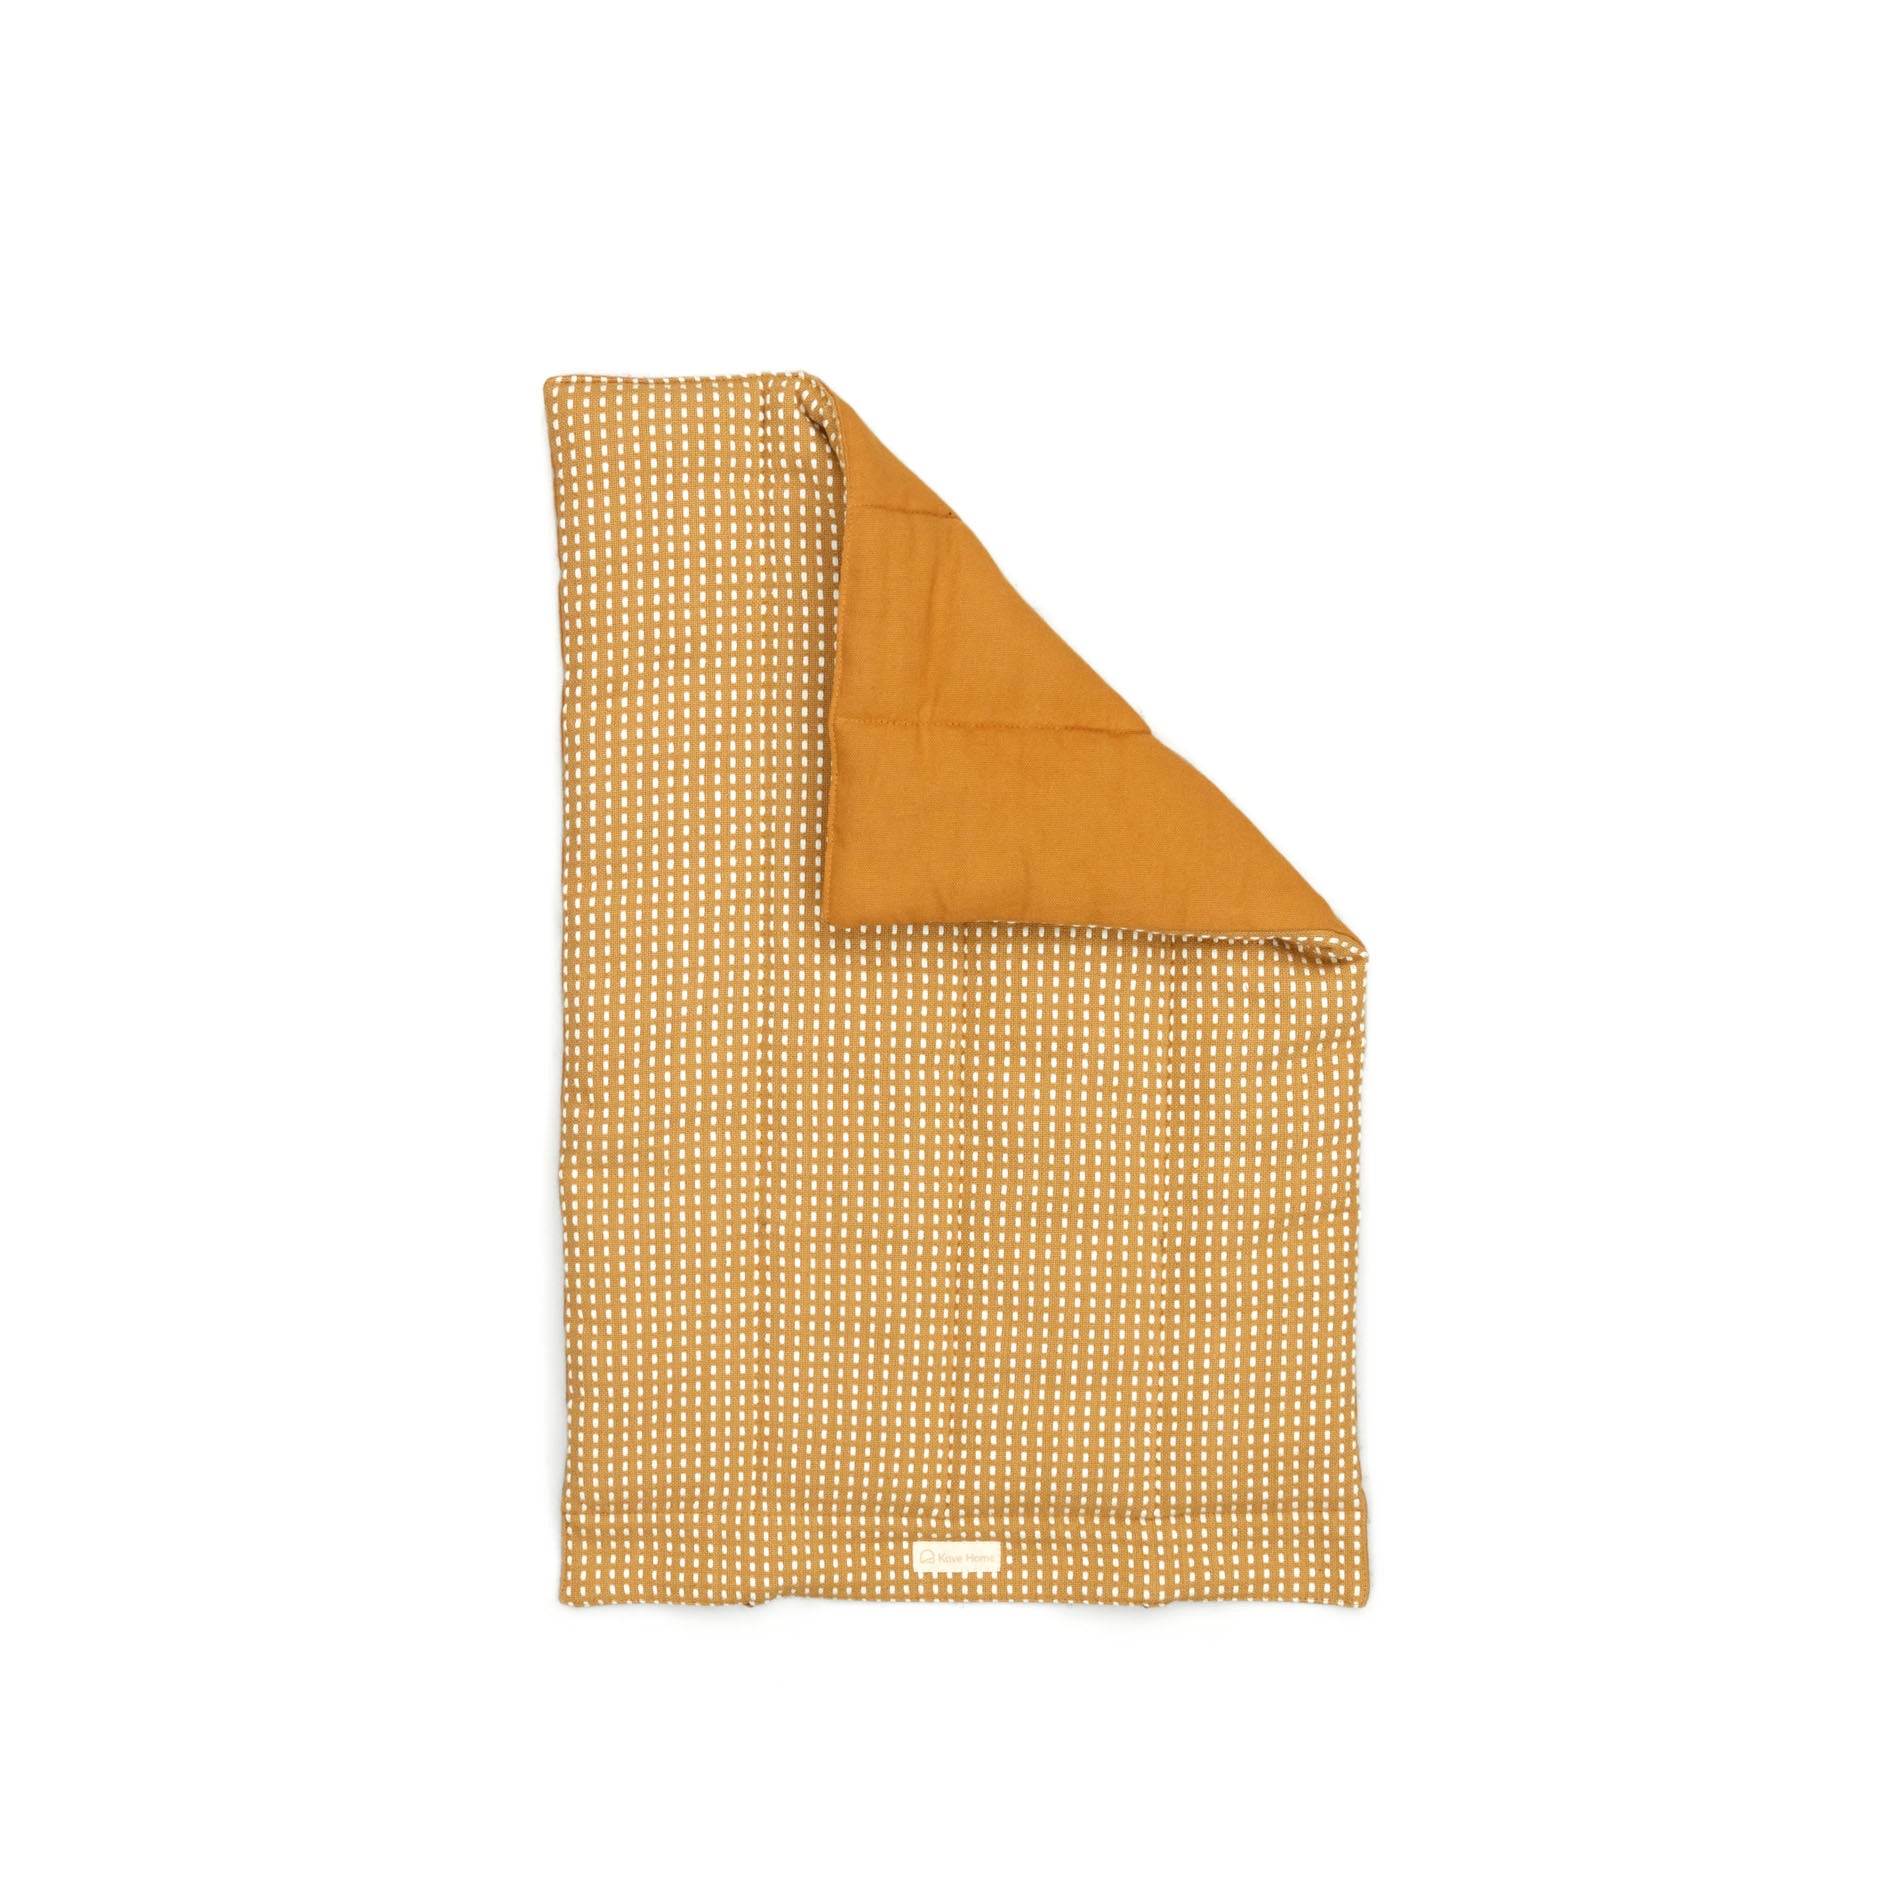 Trufa 100% cotton portable pet blanket with mustard and white backstitch, 50 x 70 cm